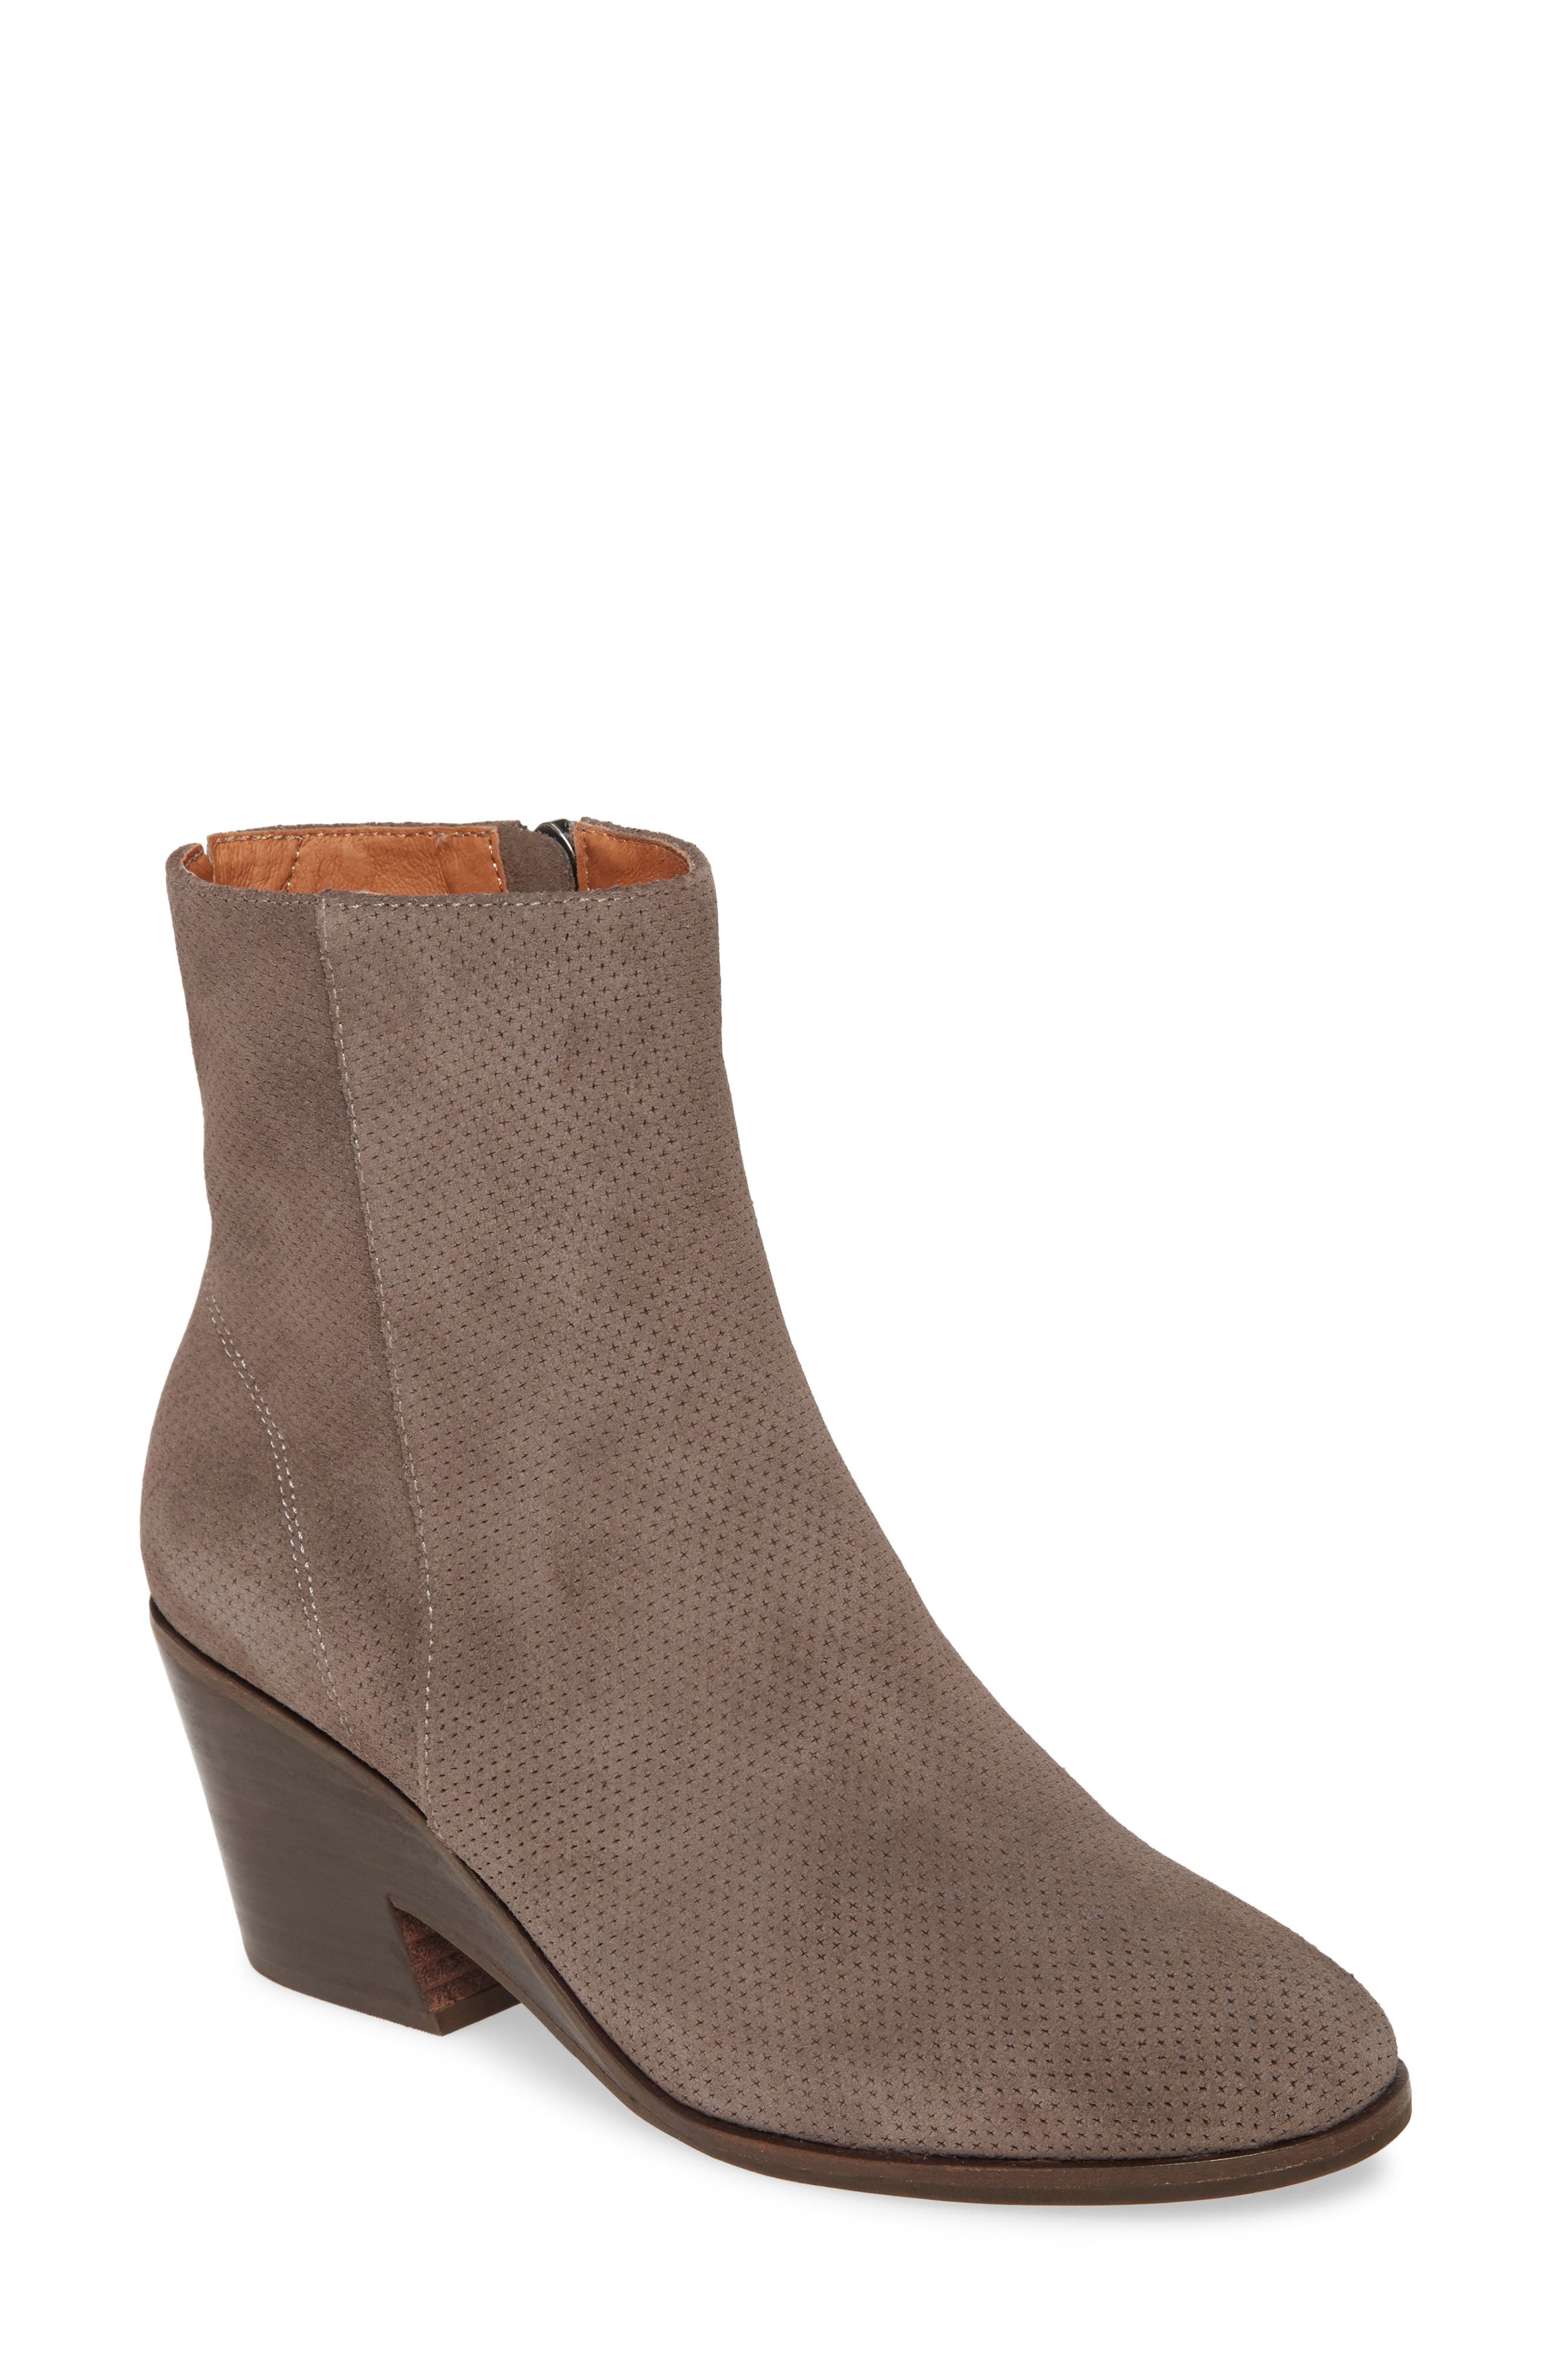 gentle souls by kenneth cole boots